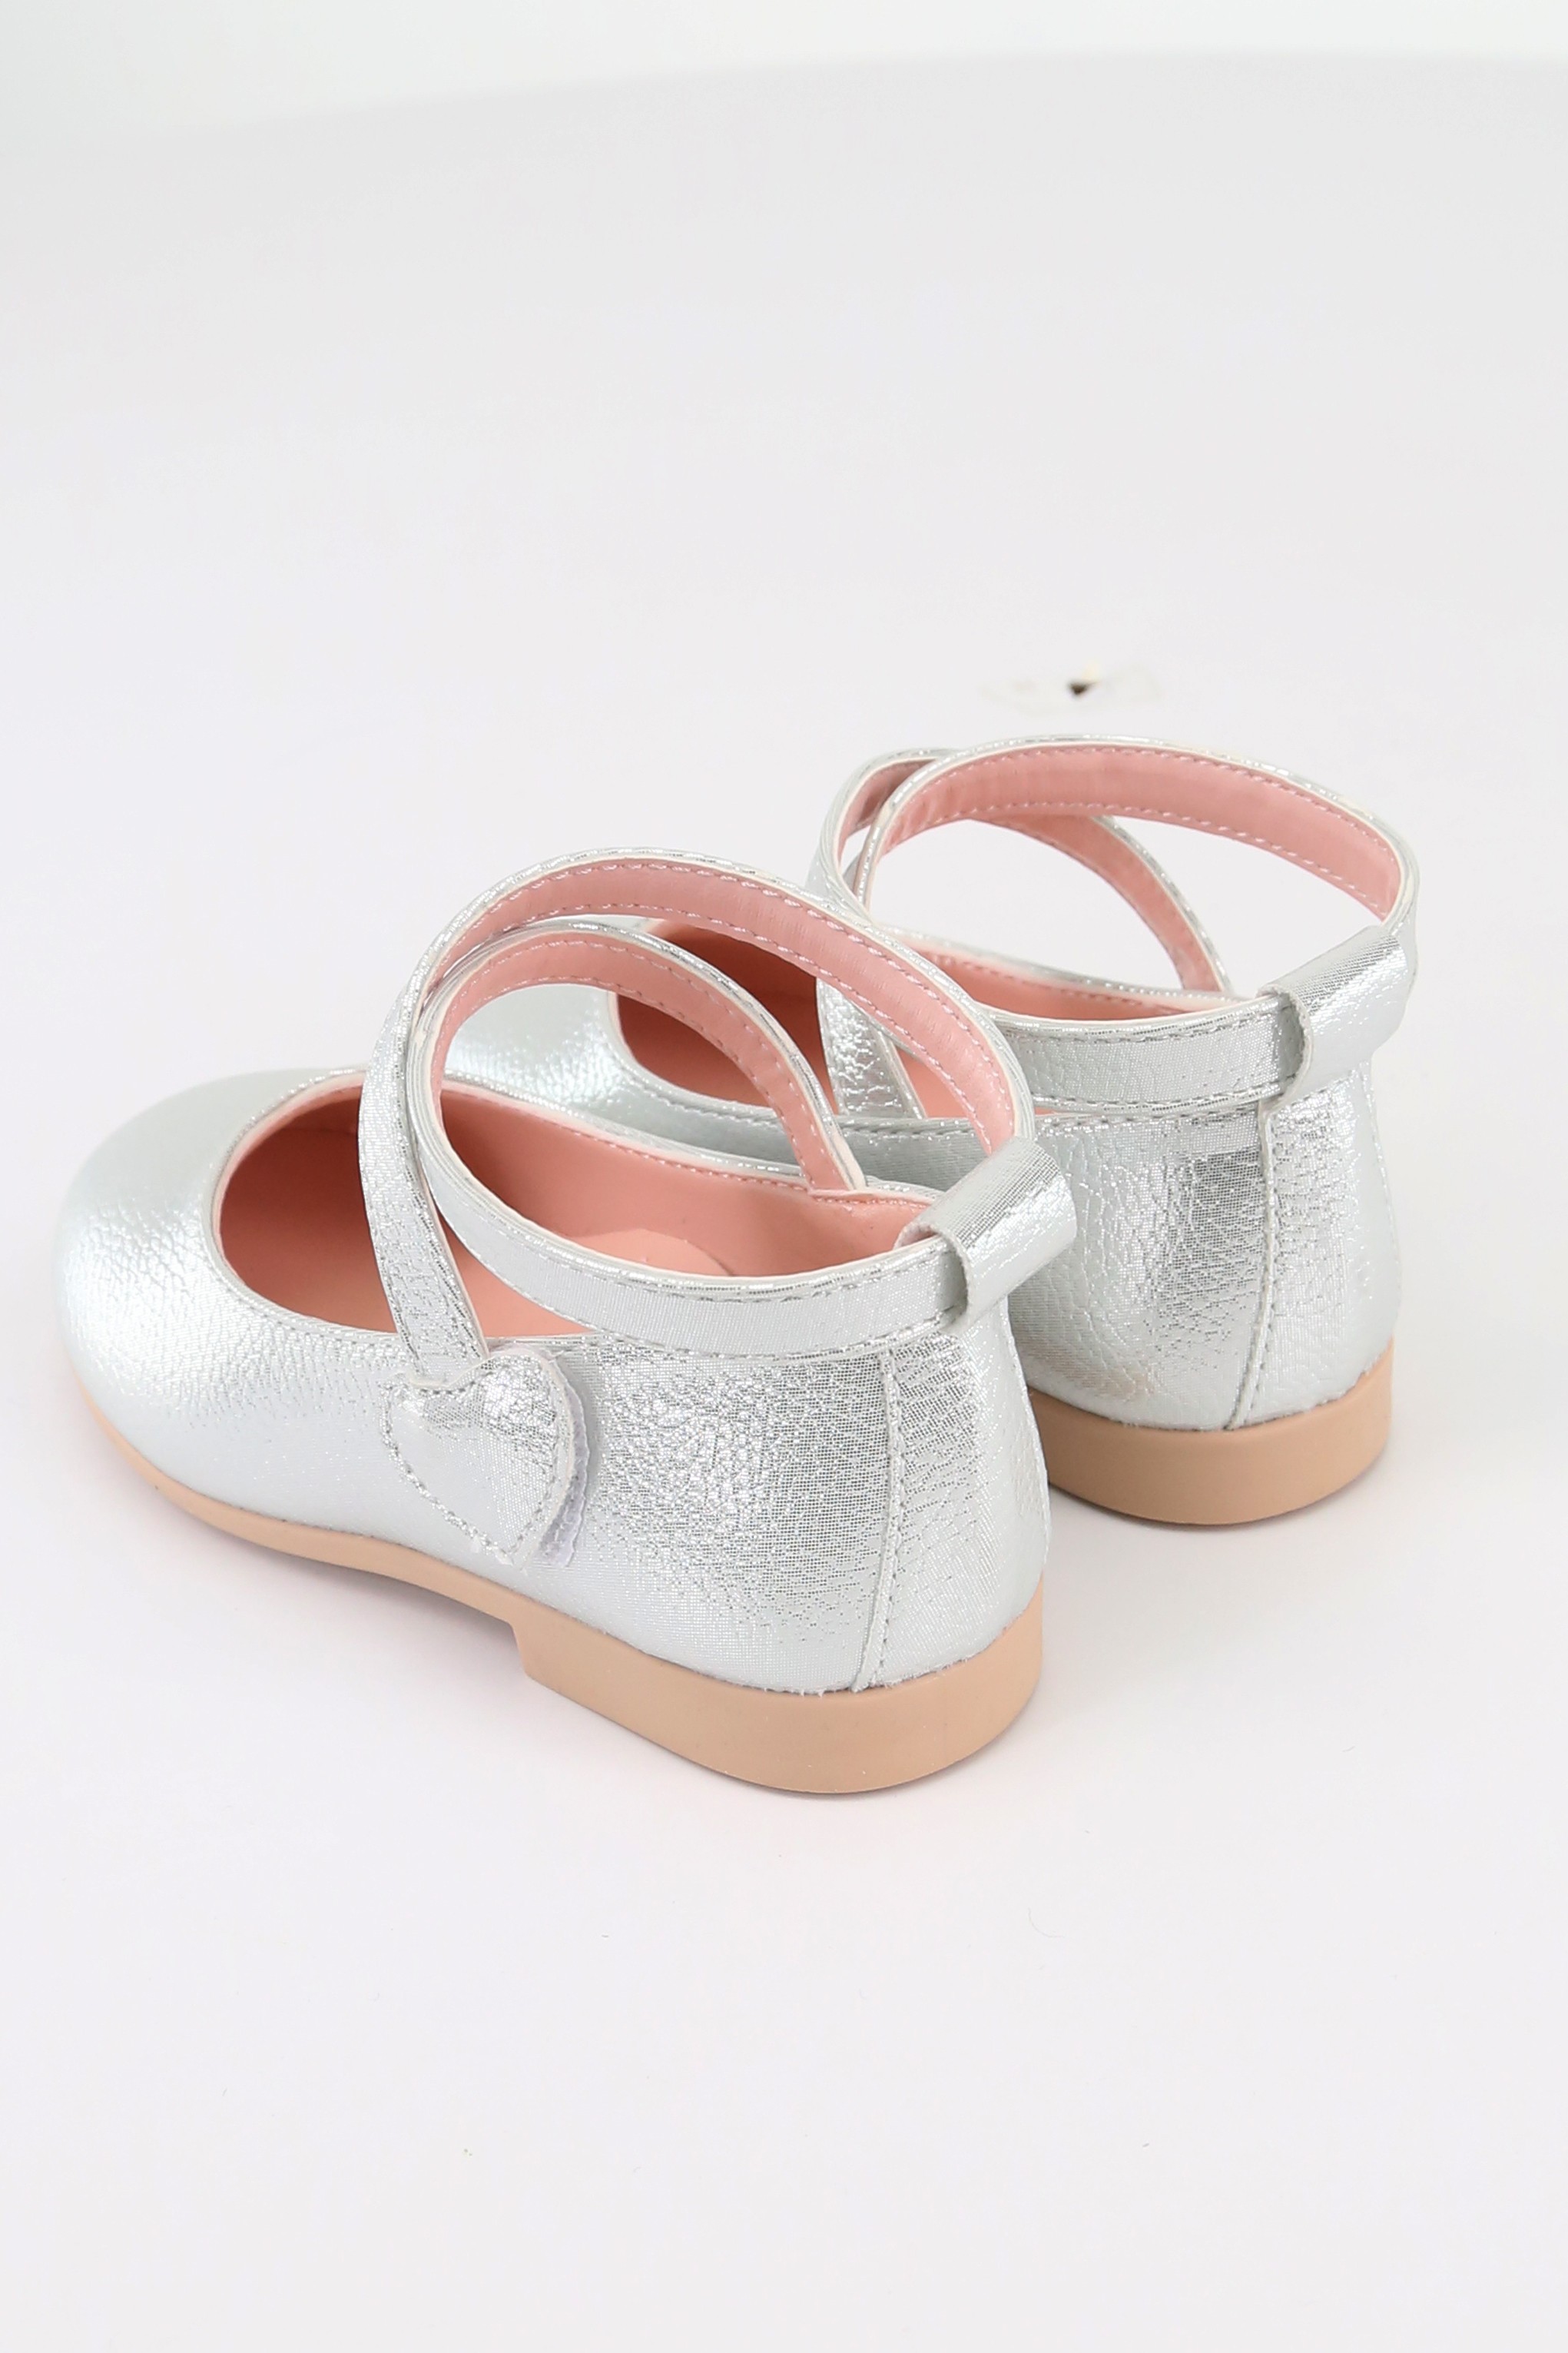 Girls' Shiny Mary Jane Flat Shoes with Criss Cross Strap - Ivory Silver